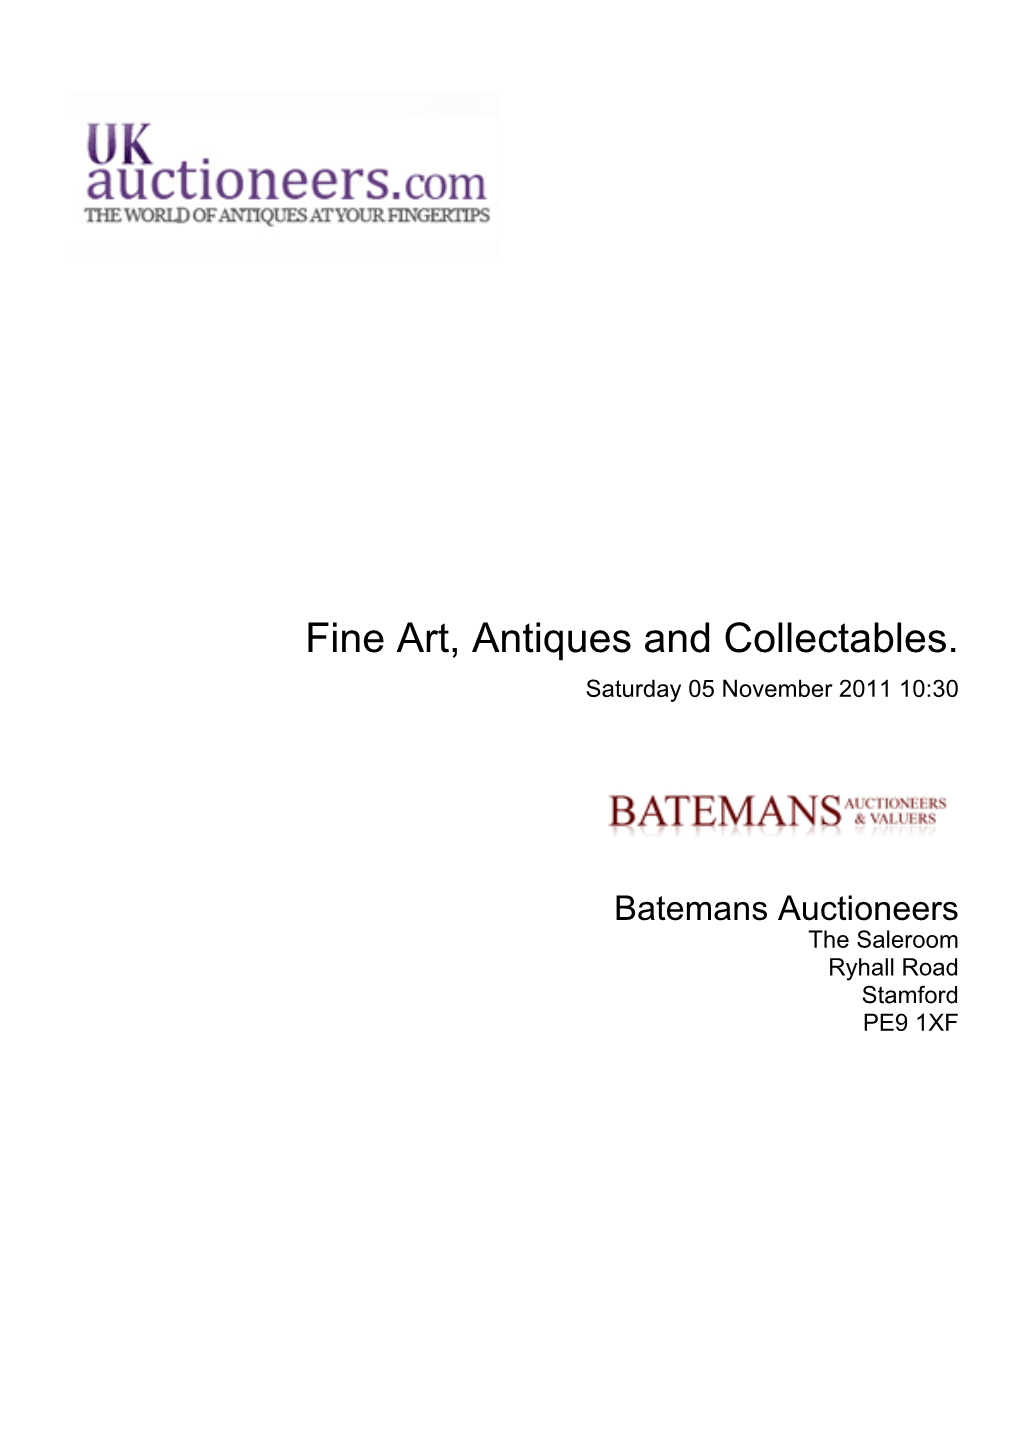 Fine Art, Antiques and Collectables. Saturday 05 November 2011 10:30